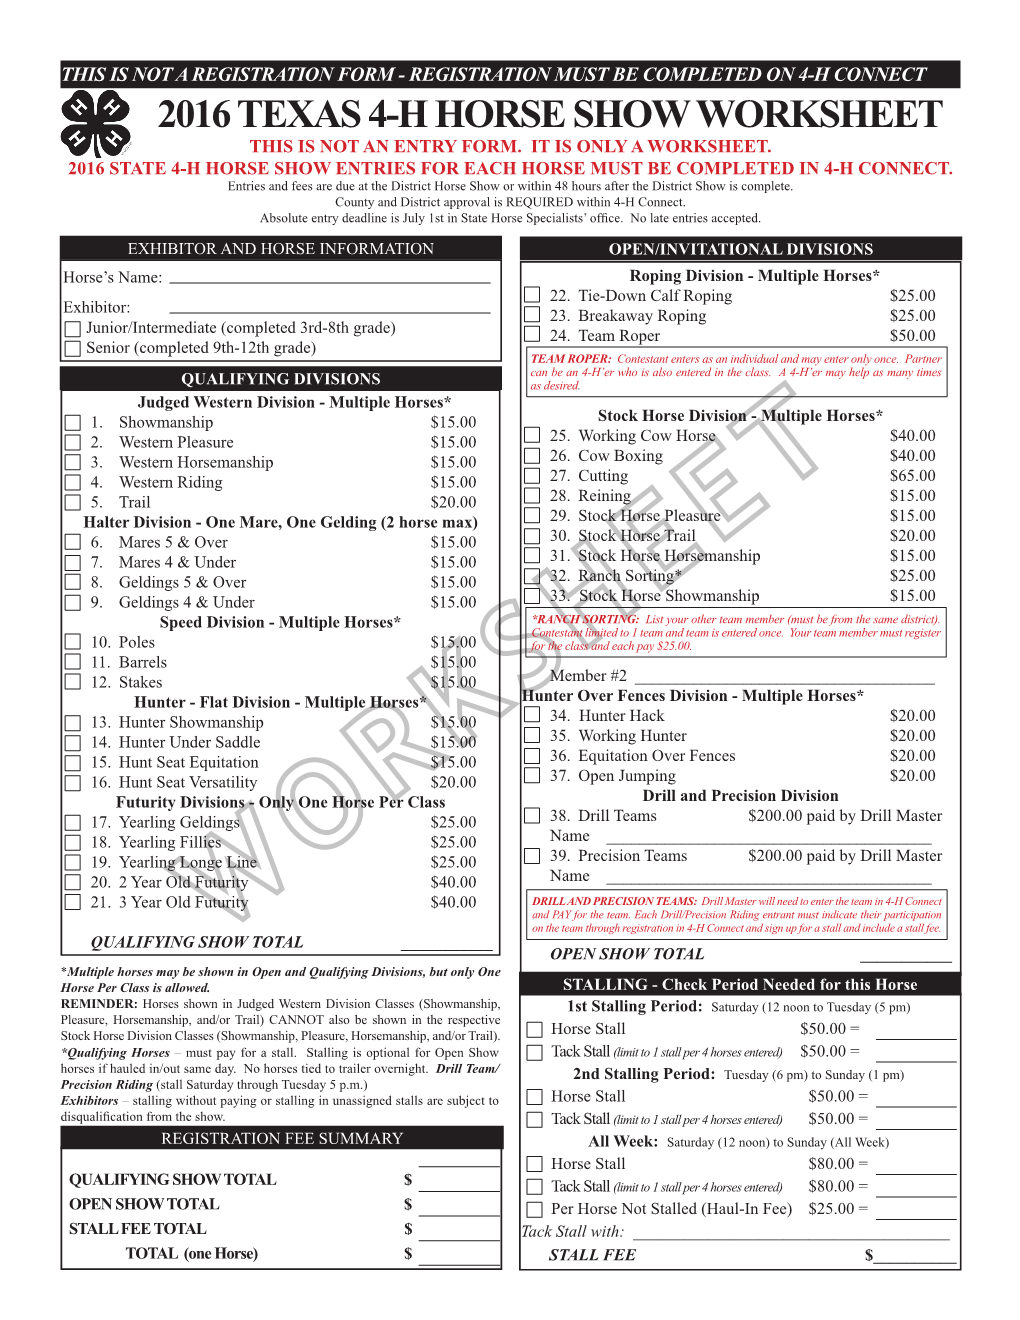 2016 Texas 4-H Horse Show Worksheet This Is Not an Entry Form